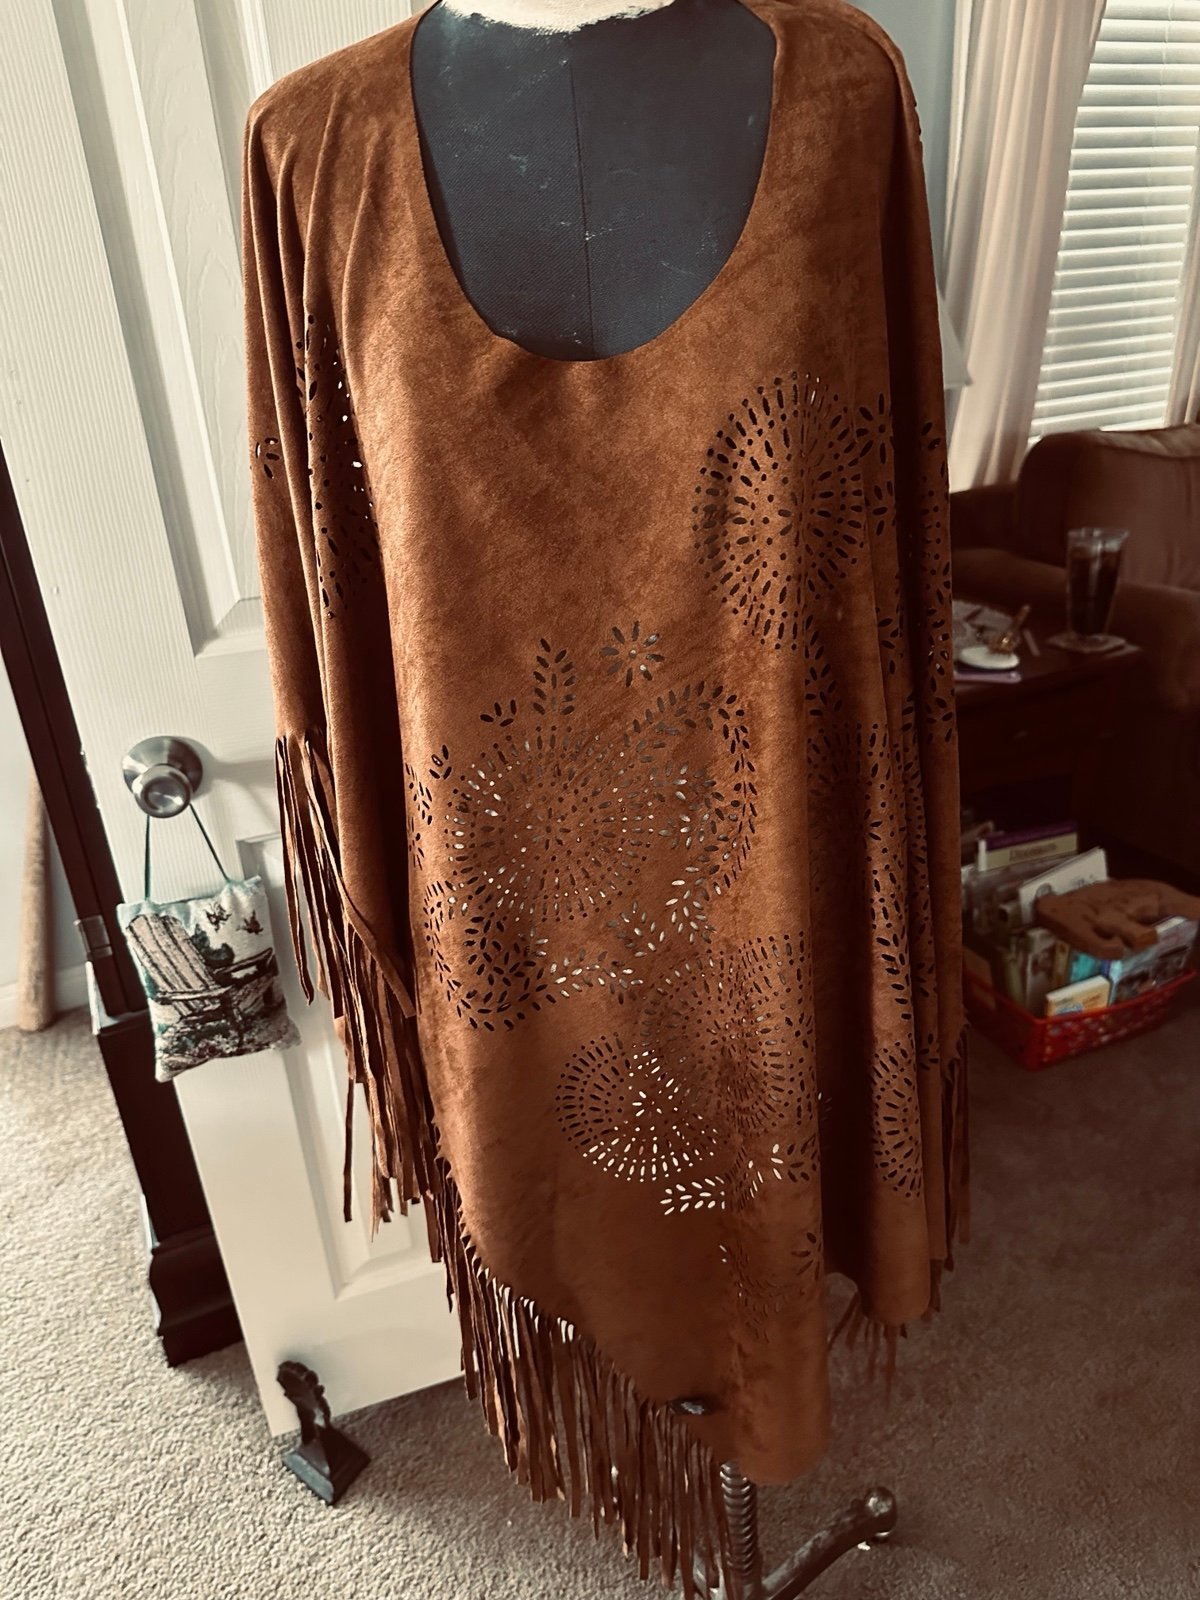 reasonable price Step in Style Suede-look Boho Fringed Boho Tunic poncho One size ogE1dO2fx no tax